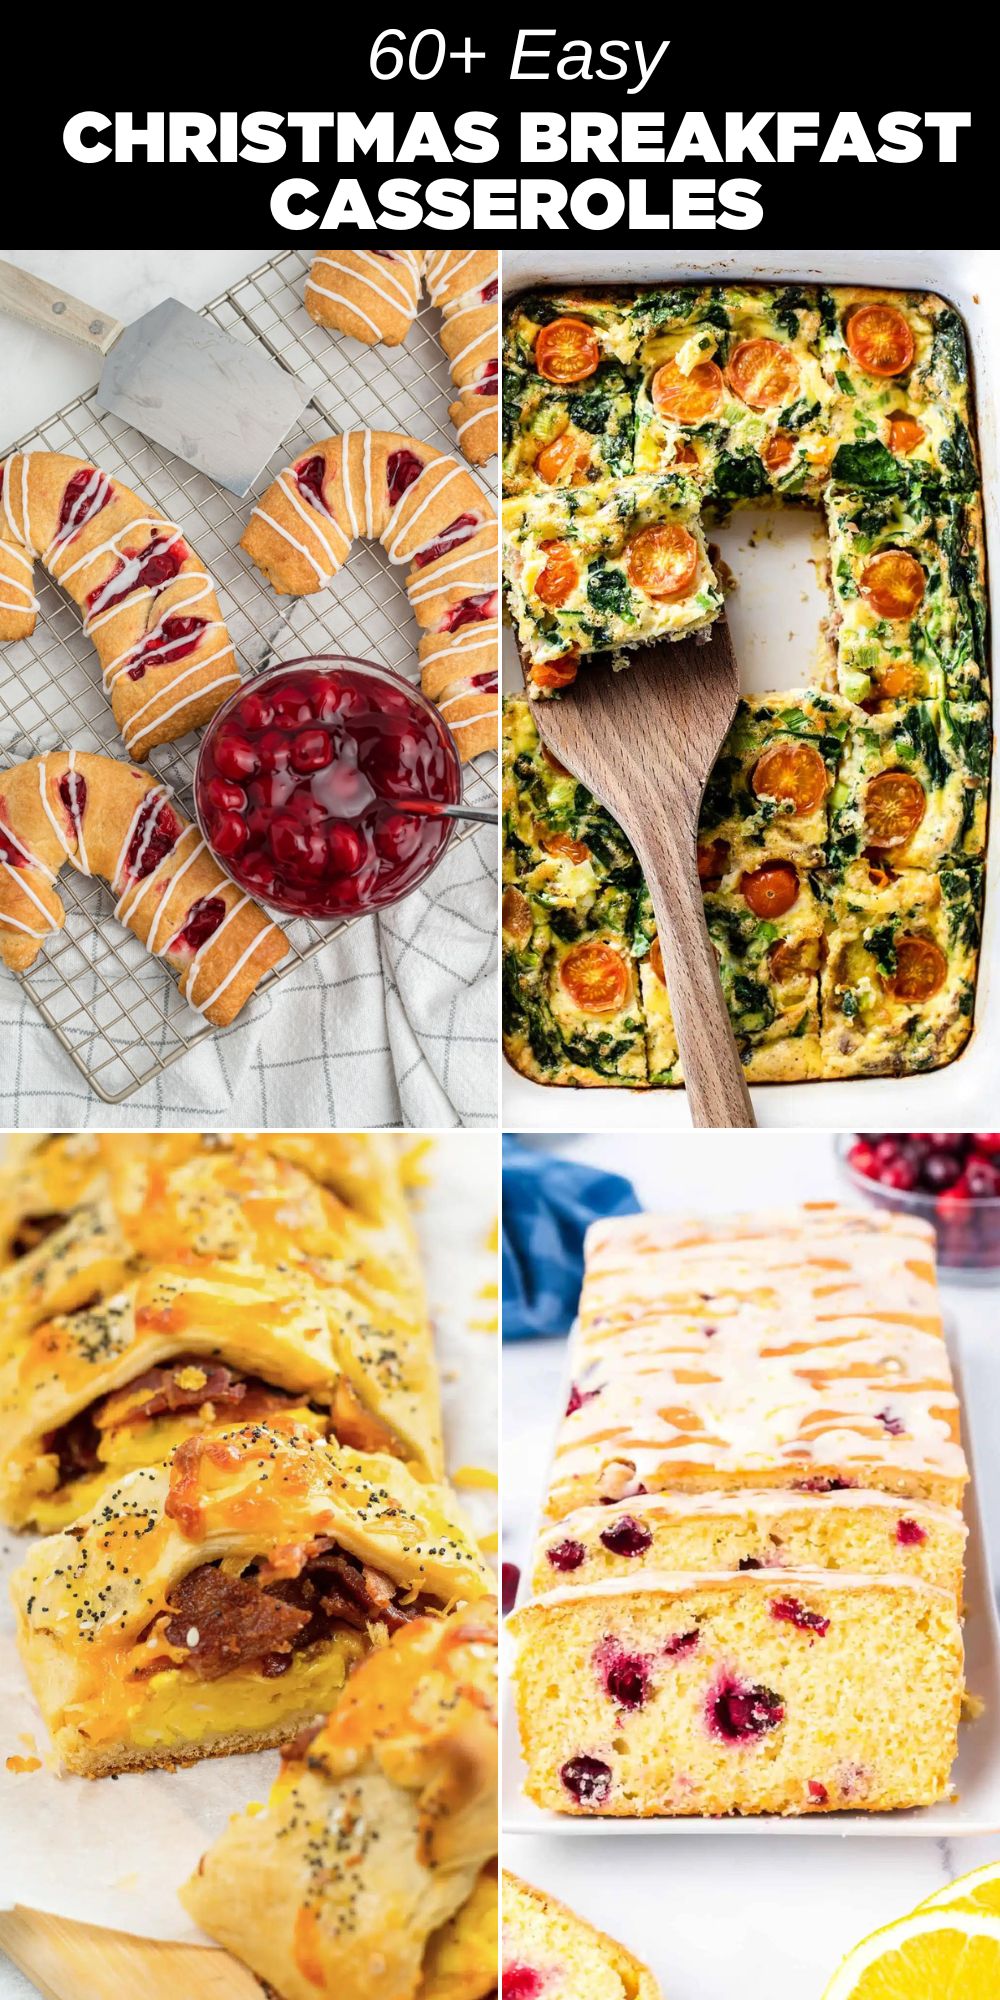 These Easy Christmas Brunch Recipes make the perfect addition to any holiday spread. Whether it's sweet treats, savory bites, or tasty beverages, you'll find everything you need for a brunch-time feast.